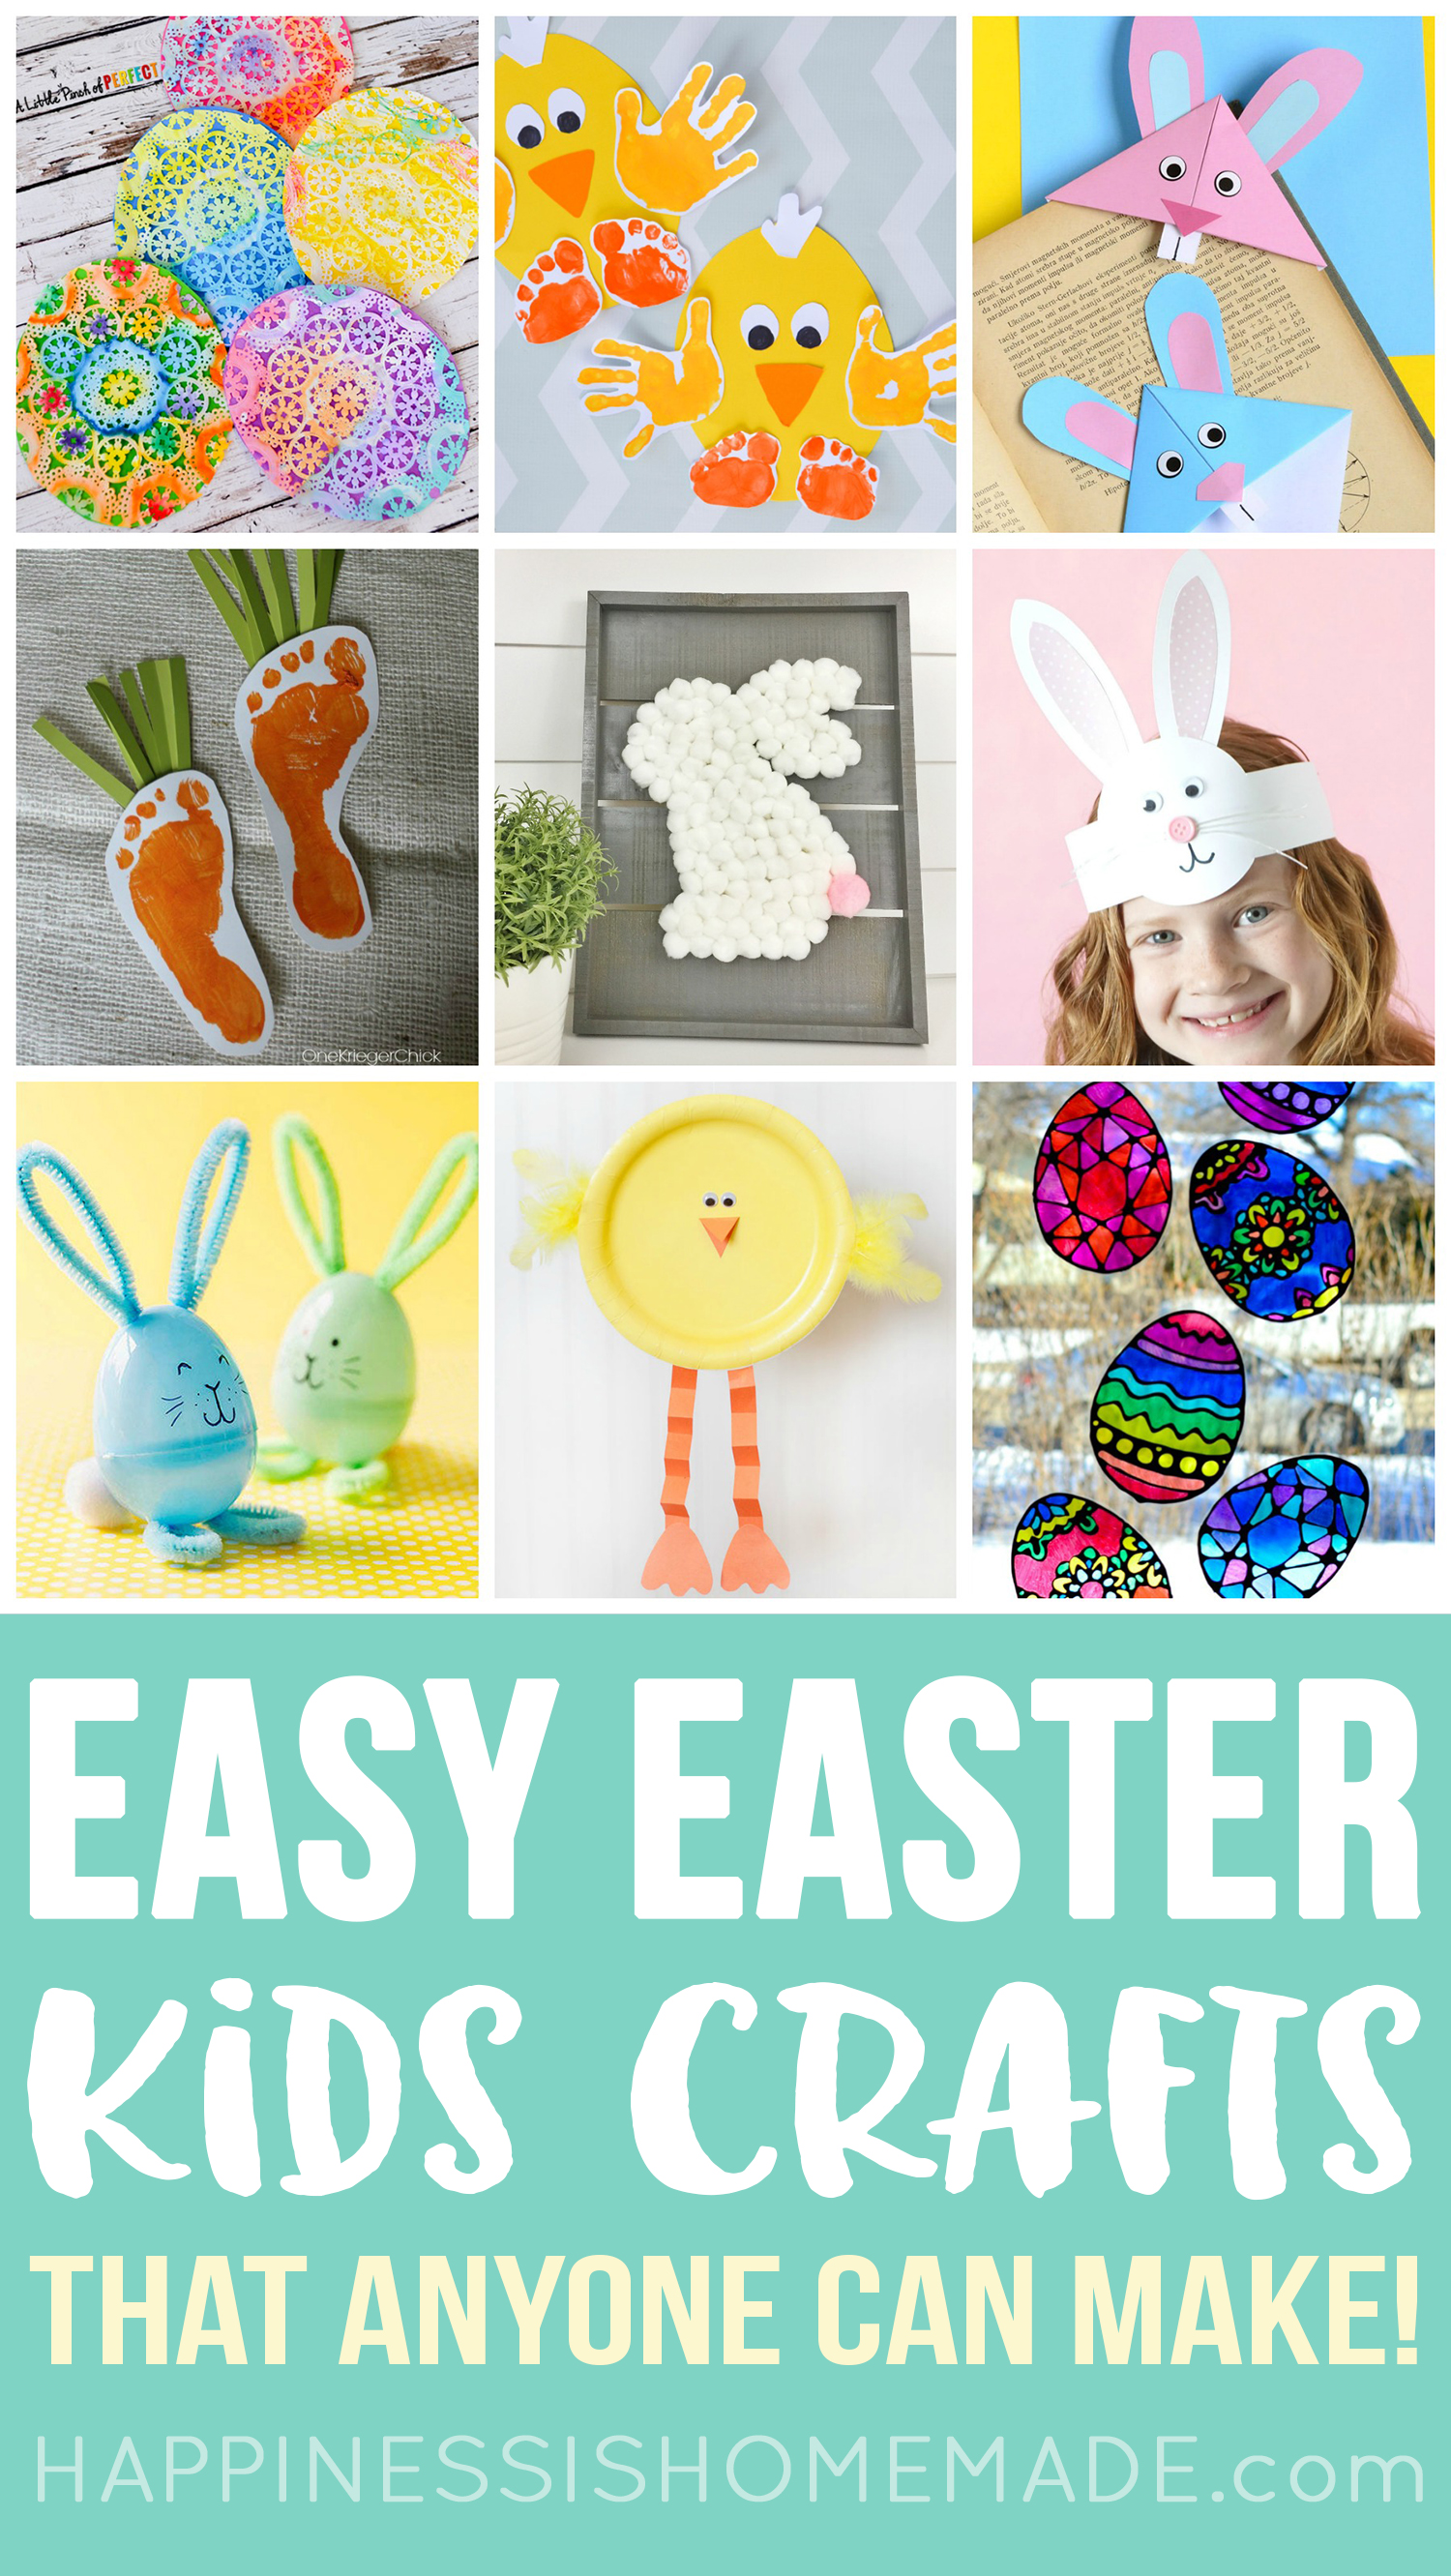 https://www.happinessishomemade.net/wp-content/uploads/2019/03/Quick-and-Easy-Easter-Kids-Crafts.jpg